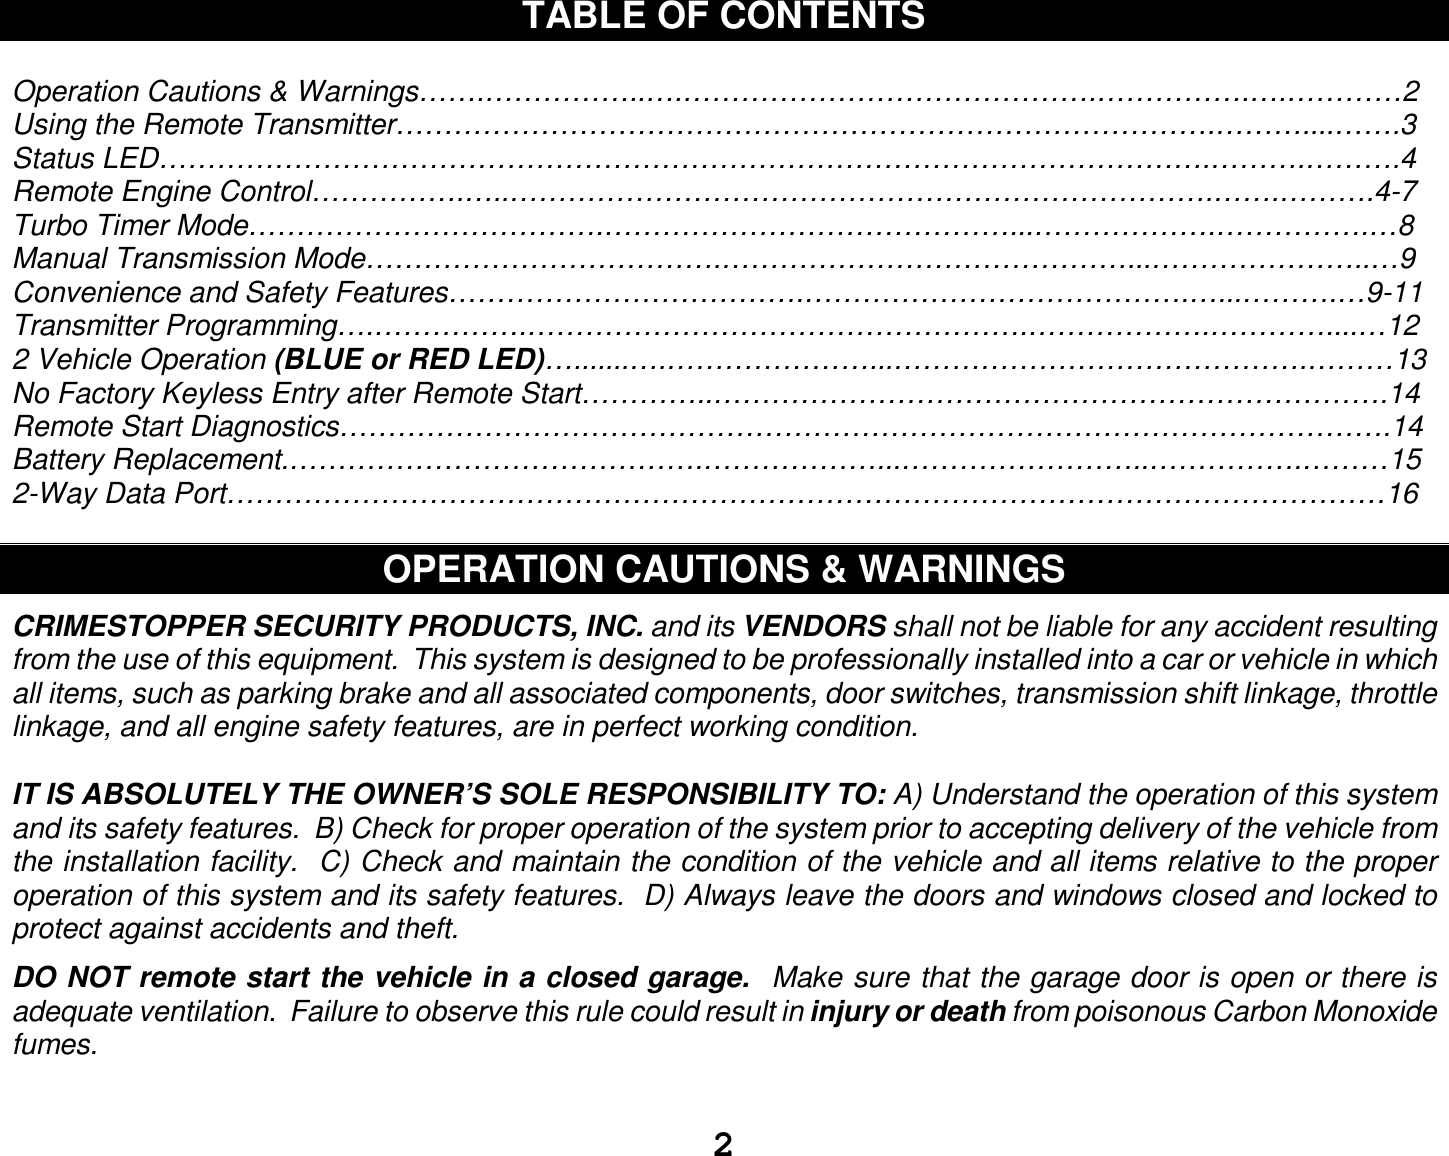  2 TABLE OF CONTENTS  Operation Cautions &amp; Warnings…….……………..….…………………………………….…………….….…………2 Using the Remote Transmitter………………………………………………………………………….………....…….3 Status LED……………………………………………………………………………………………….……….……….4 Remote Engine Control…………….…..……………………………………………………………….…….……….4-7 Turbo Timer Mode……………………………….……………………………………...……………….…………….…8 Manual Transmission Mode……………………………….……………………………………...…………………..…9 Convenience and Safety Features……………………………….………………………………….…...……….…9-11 Transmitter Programming….…………….…………………………………………….……………….…………....…12 2 Vehicle Operation (BLUE or RED LED)….......….…………………...…………………………………….………13 No Factory Keyless Entry after Remote Start…………..…………………………………………………………….14 Remote Start Diagnostics……………………………………………………………………………………………….14 Battery Replacement.…………………………………….………………...……………………..…………….………15 2-Way Data Port…………………………………………………………………………………………………………16  OPERATION CAUTIONS &amp; WARNINGS  CRIMESTOPPER SECURITY PRODUCTS, INC. and its VENDORS shall not be liable for any accident resulting from the use of this equipment.  This system is designed to be professionally installed into a car or vehicle in which all items, such as parking brake and all associated components, door switches, transmission shift linkage, throttle linkage, and all engine safety features, are in perfect working condition.  IT IS ABSOLUTELY THE OWNER’S SOLE RESPONSIBILITY TO: A) Understand the operation of this system and its safety features.  B) Check for proper operation of the system prior to accepting delivery of the vehicle from the installation facility.  C) Check and maintain the condition of the vehicle and all items relative to the proper operation of this system and its safety features.  D) Always leave the doors and windows closed and locked to protect against accidents and theft.  DO NOT remote start the vehicle in a closed garage.  Make sure that the garage door is open or there is adequate ventilation.  Failure to observe this rule could result in injury or death from poisonous Carbon Monoxide fumes.   